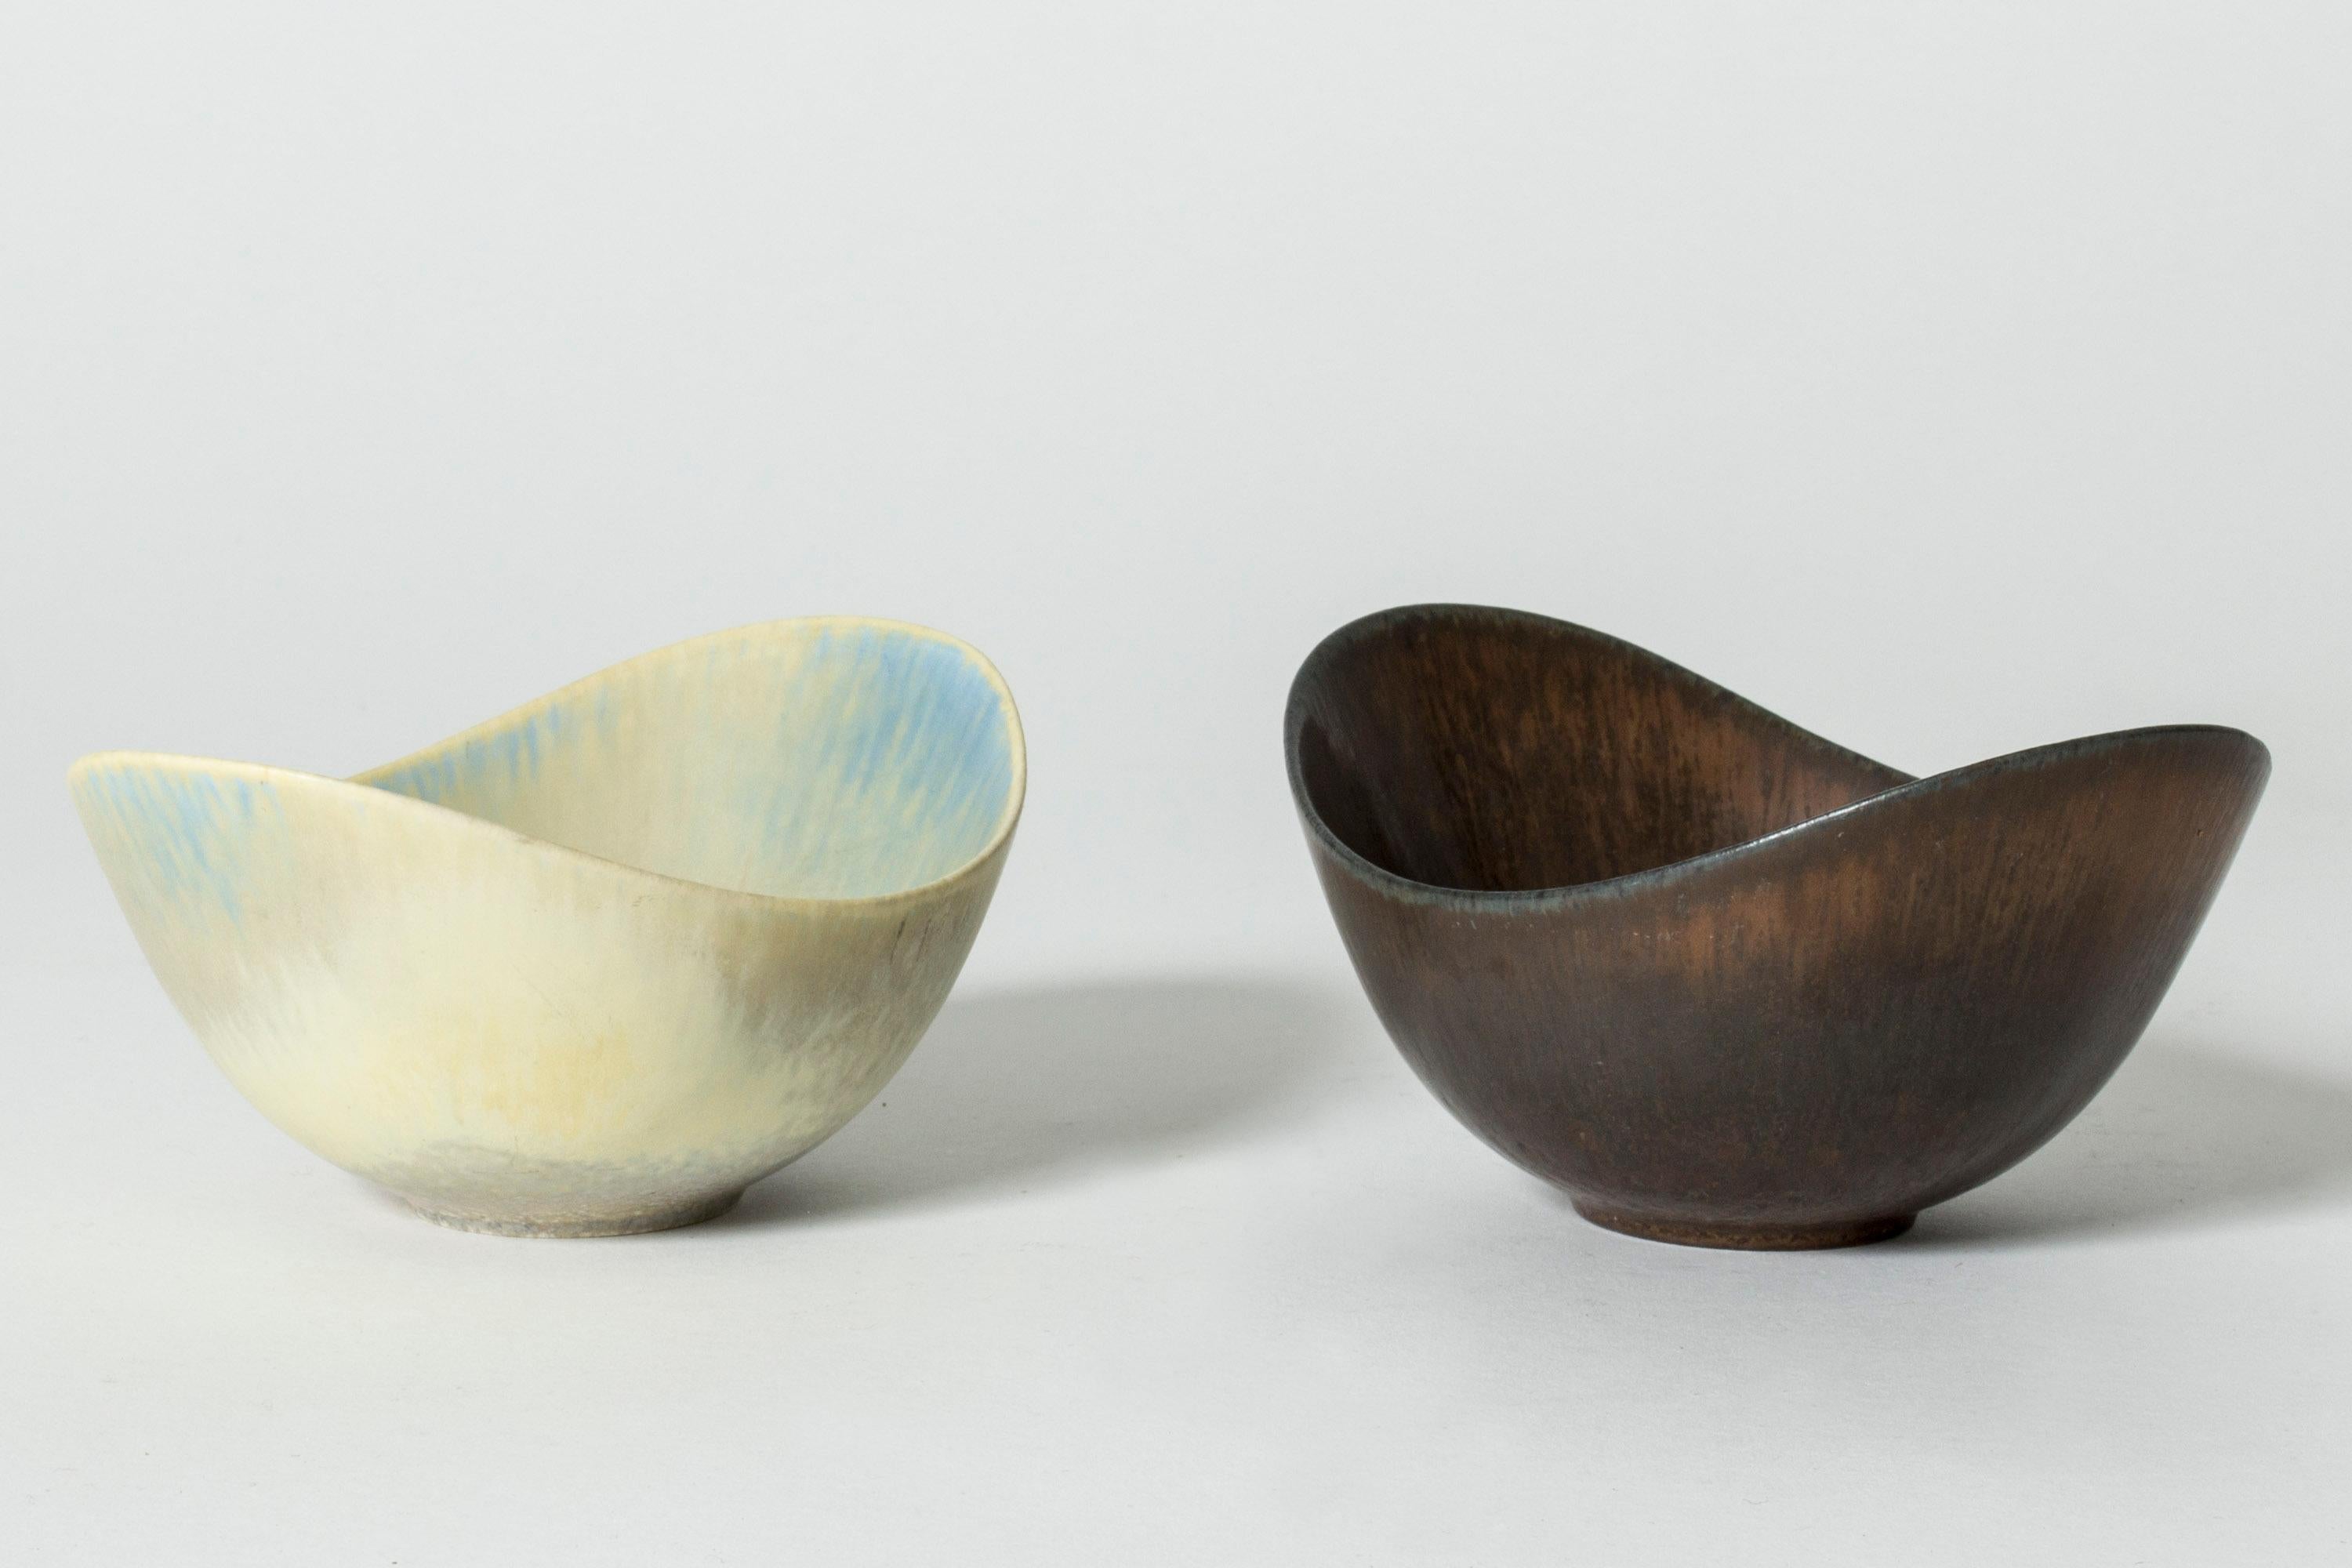 Pair of stoneware bowls by Gunnar Nylund, of the appealing “ARO” model. Streamlined, oval form with plunging sides. One with rich brown glaze and the other with eggshell and blue glaze.